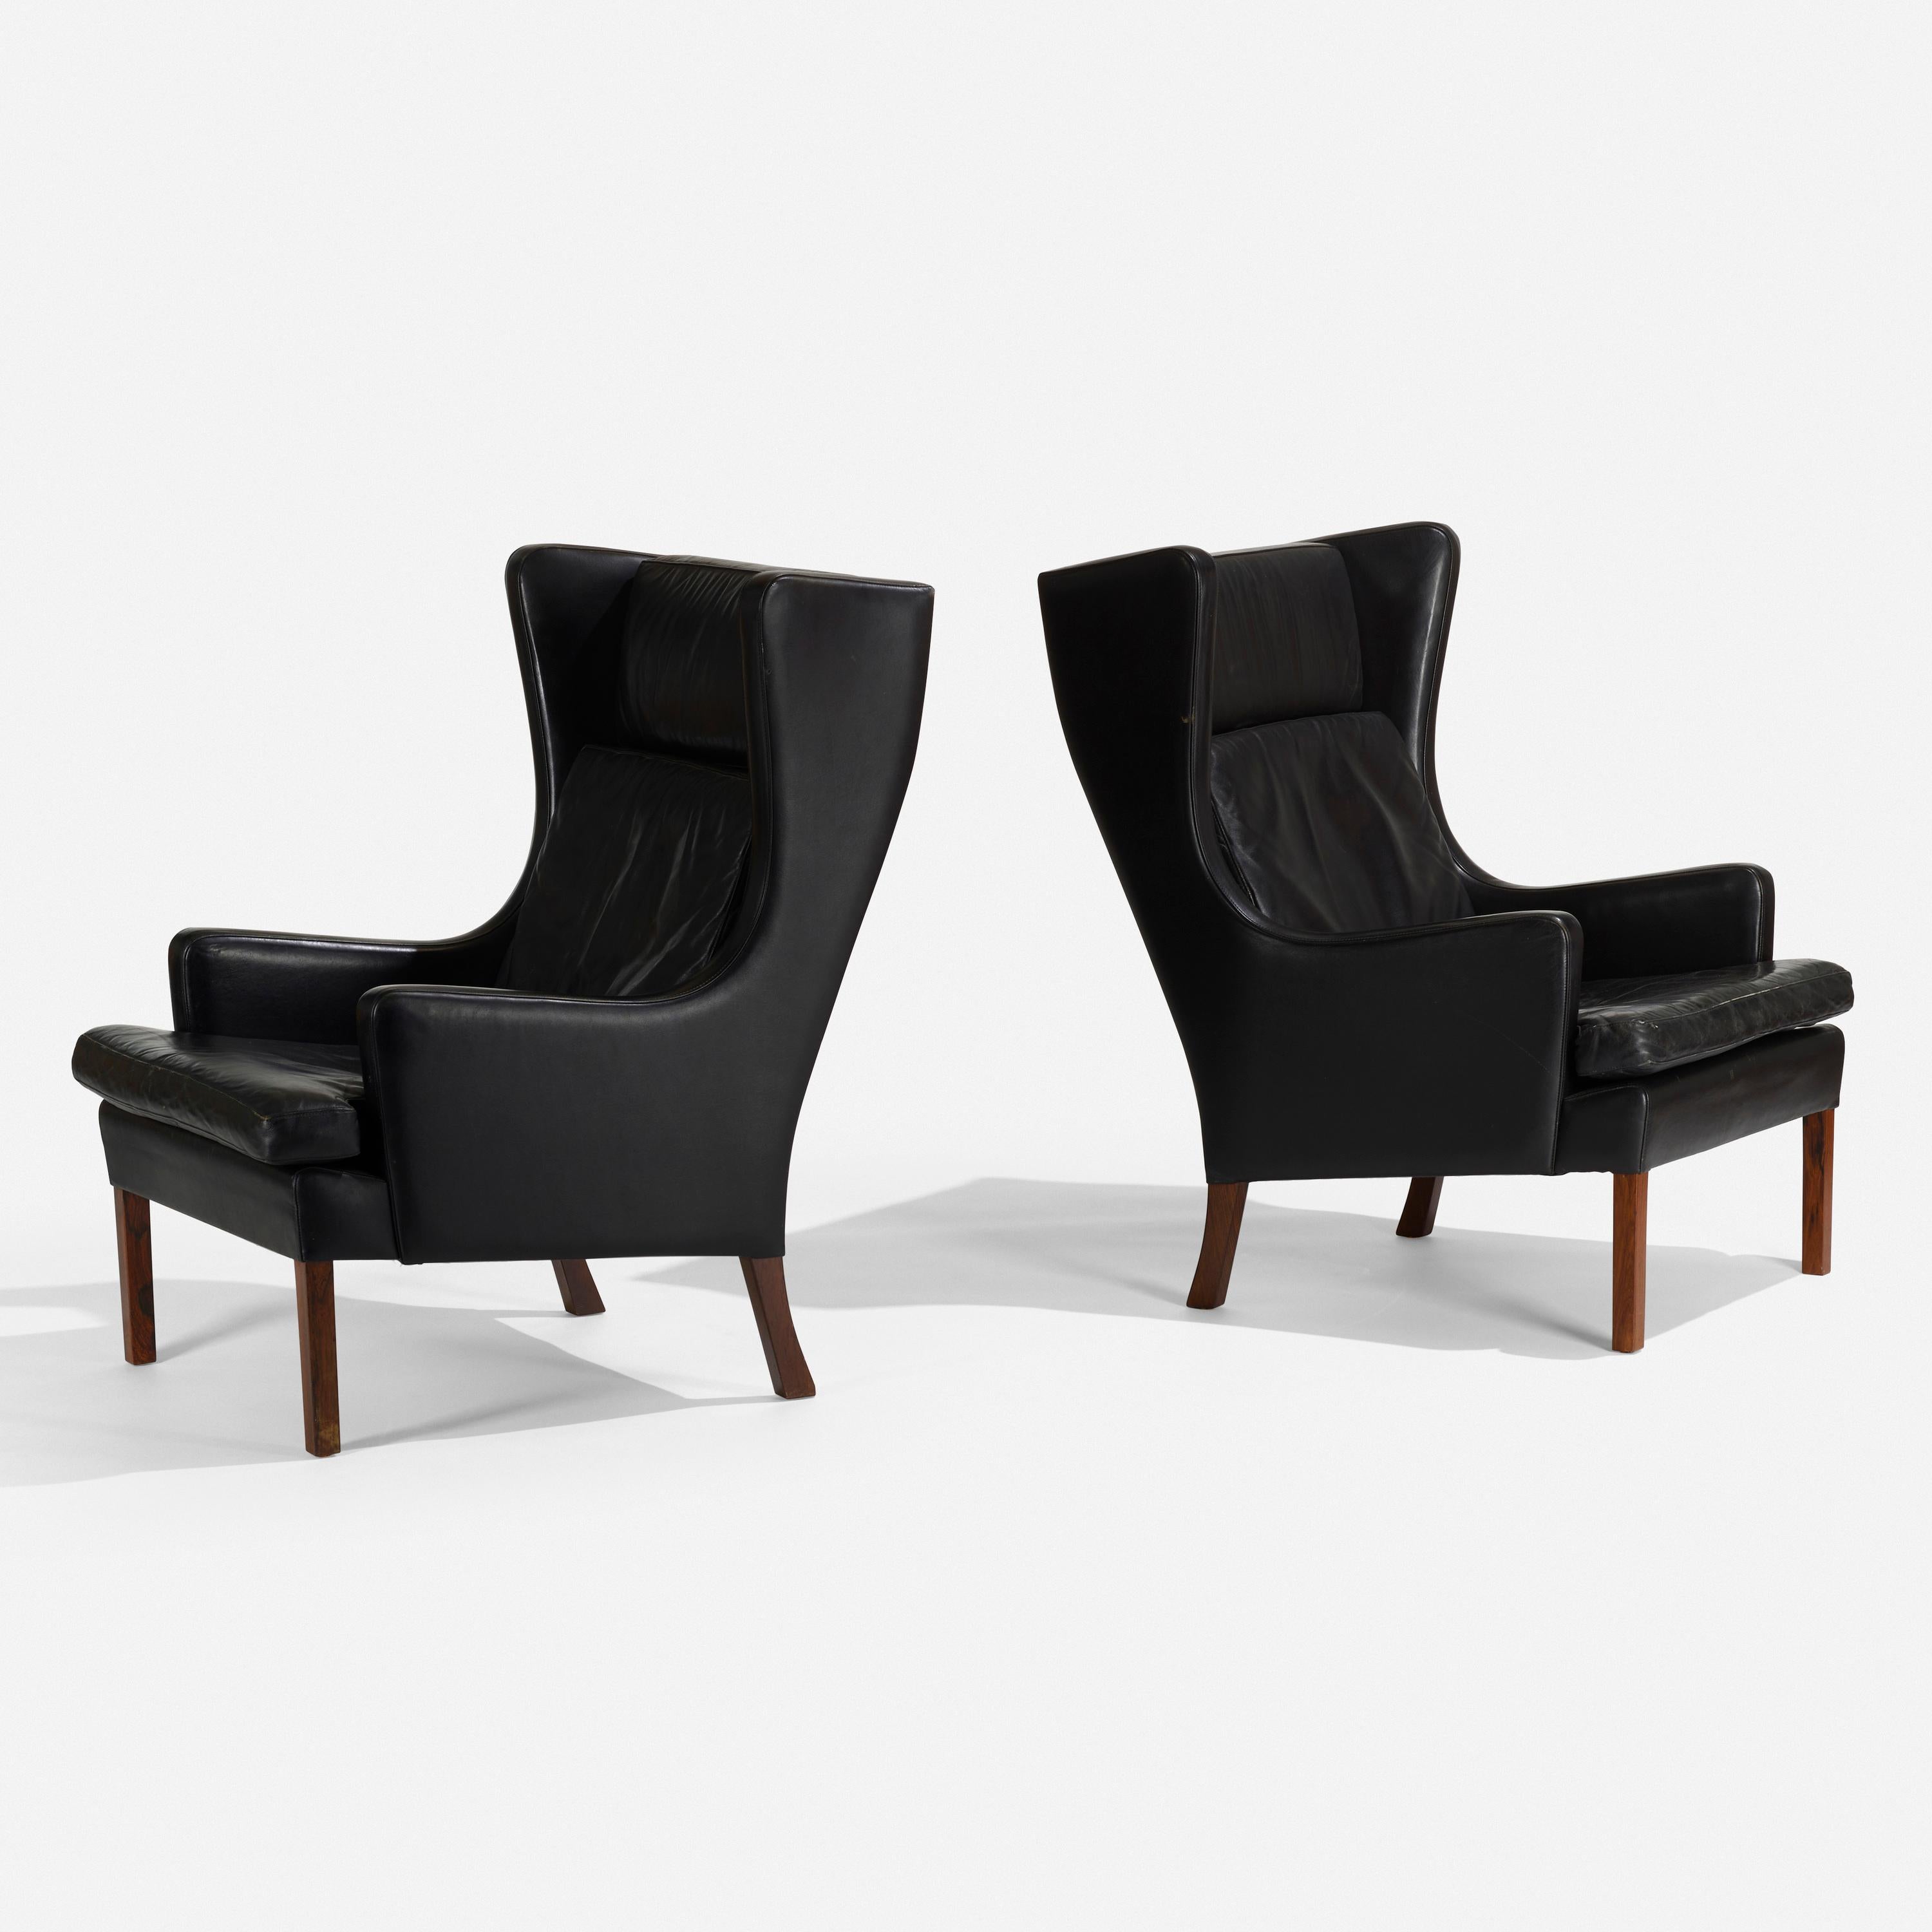 Pair of Danish walnut and leather lounge chairs.